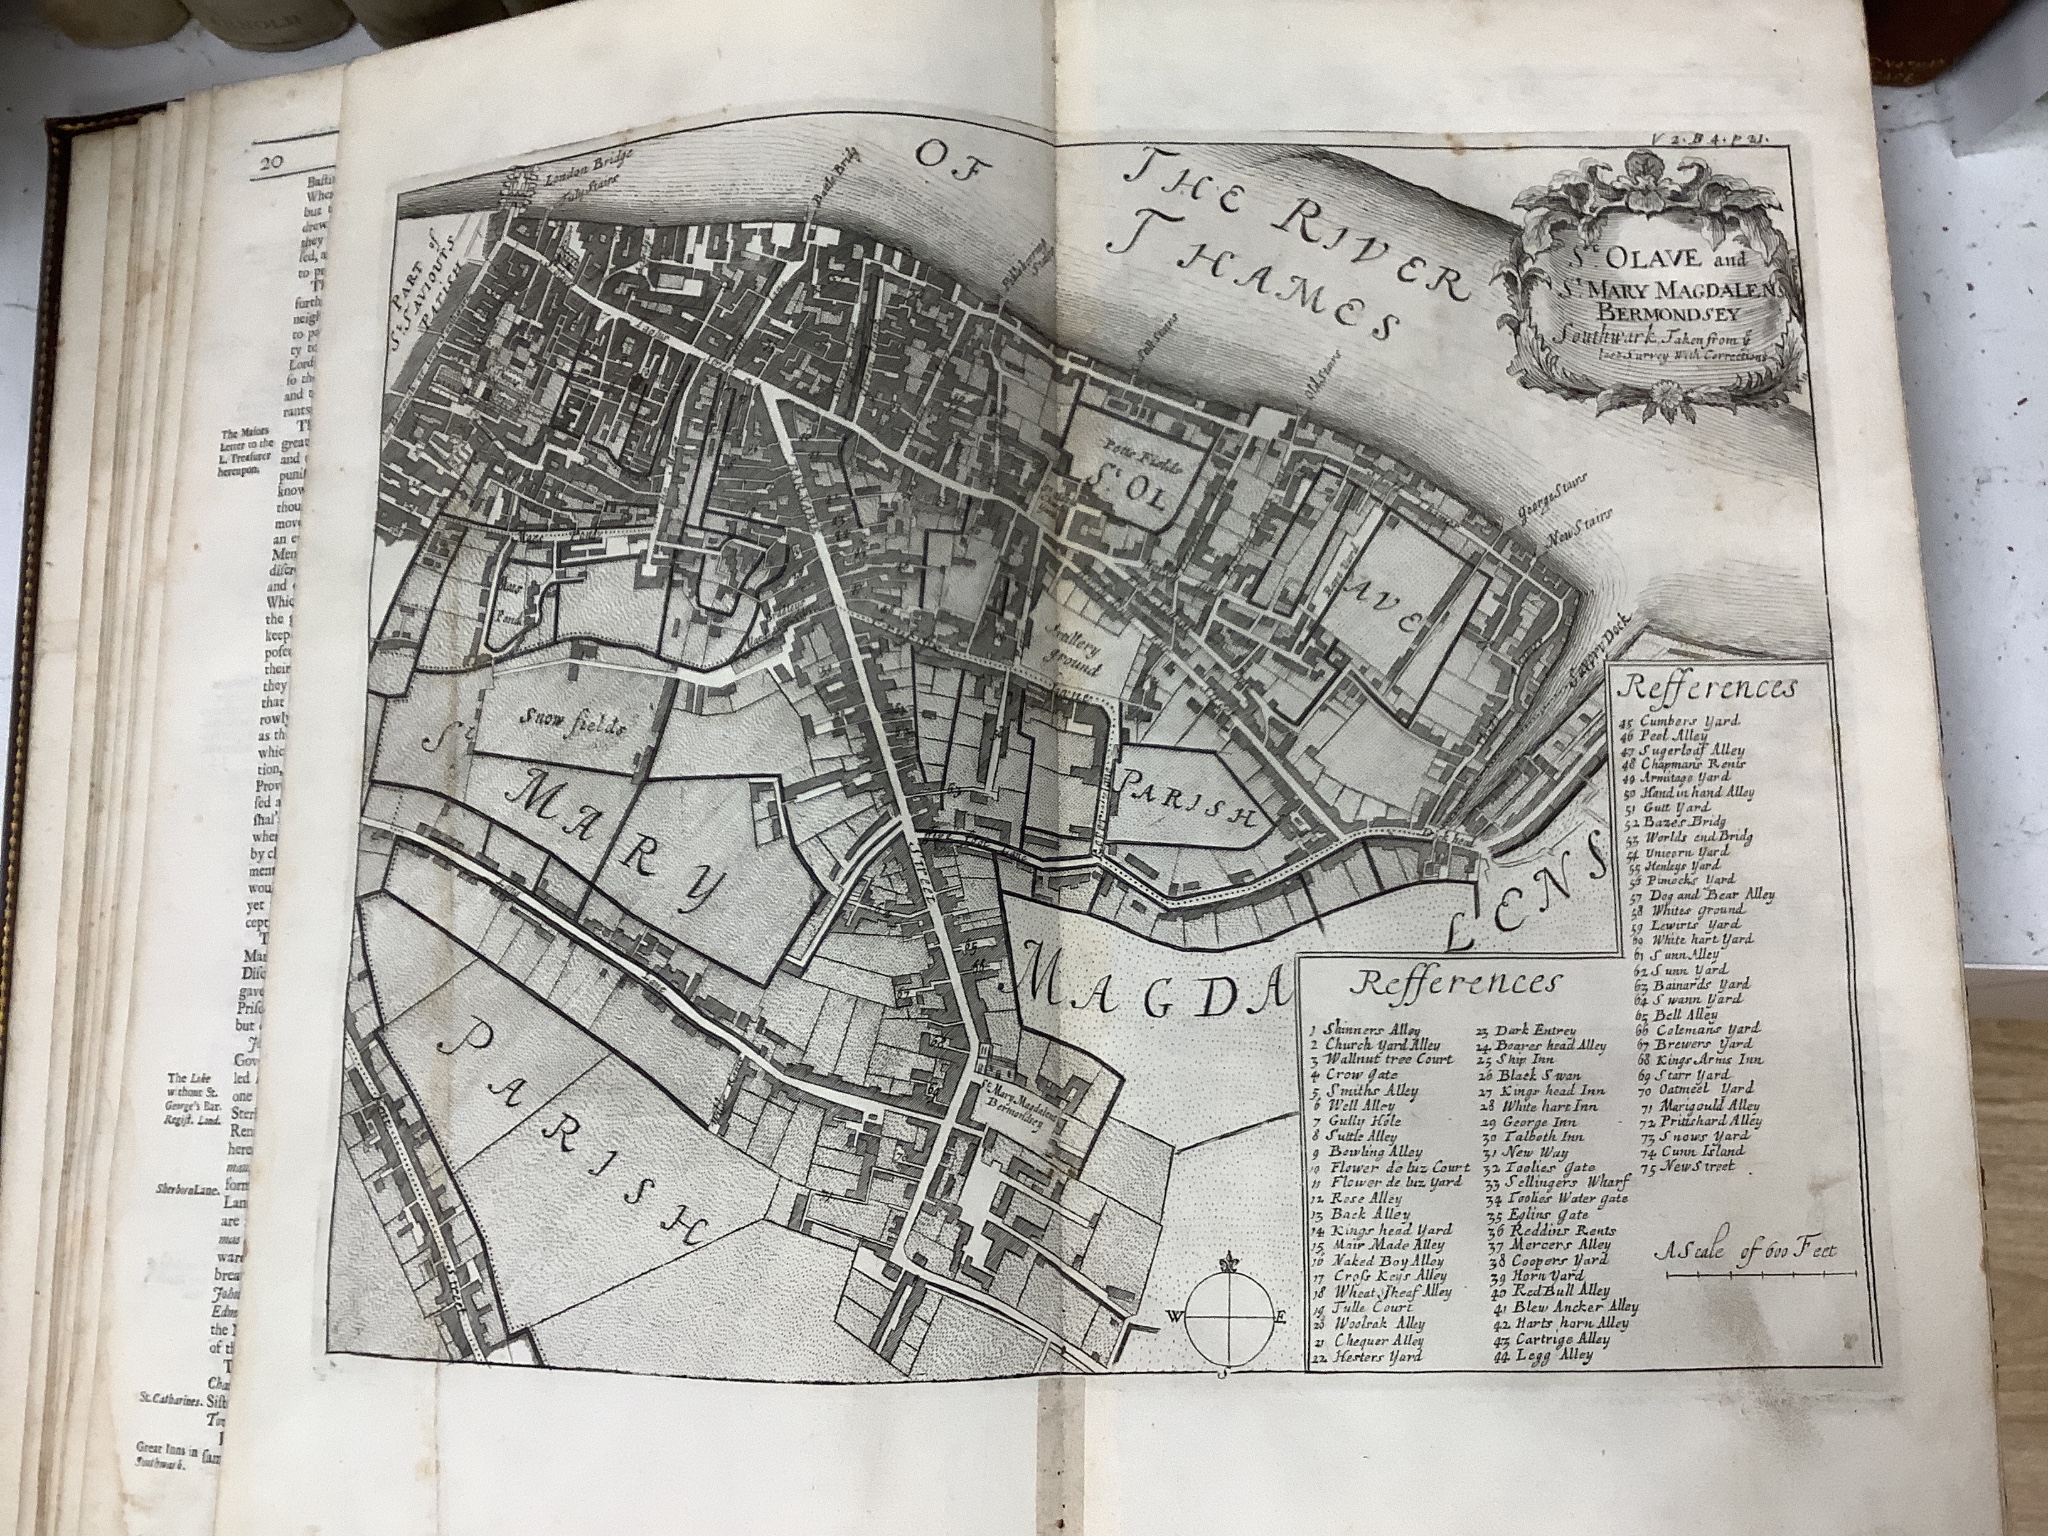 Stow, John - A Survey of the Cities of London and Westminster ... Written at first in the year MDXCVIII... Now lastly, corrected, improved, and very much enlarged ... by John Strype .. to which is prefixed